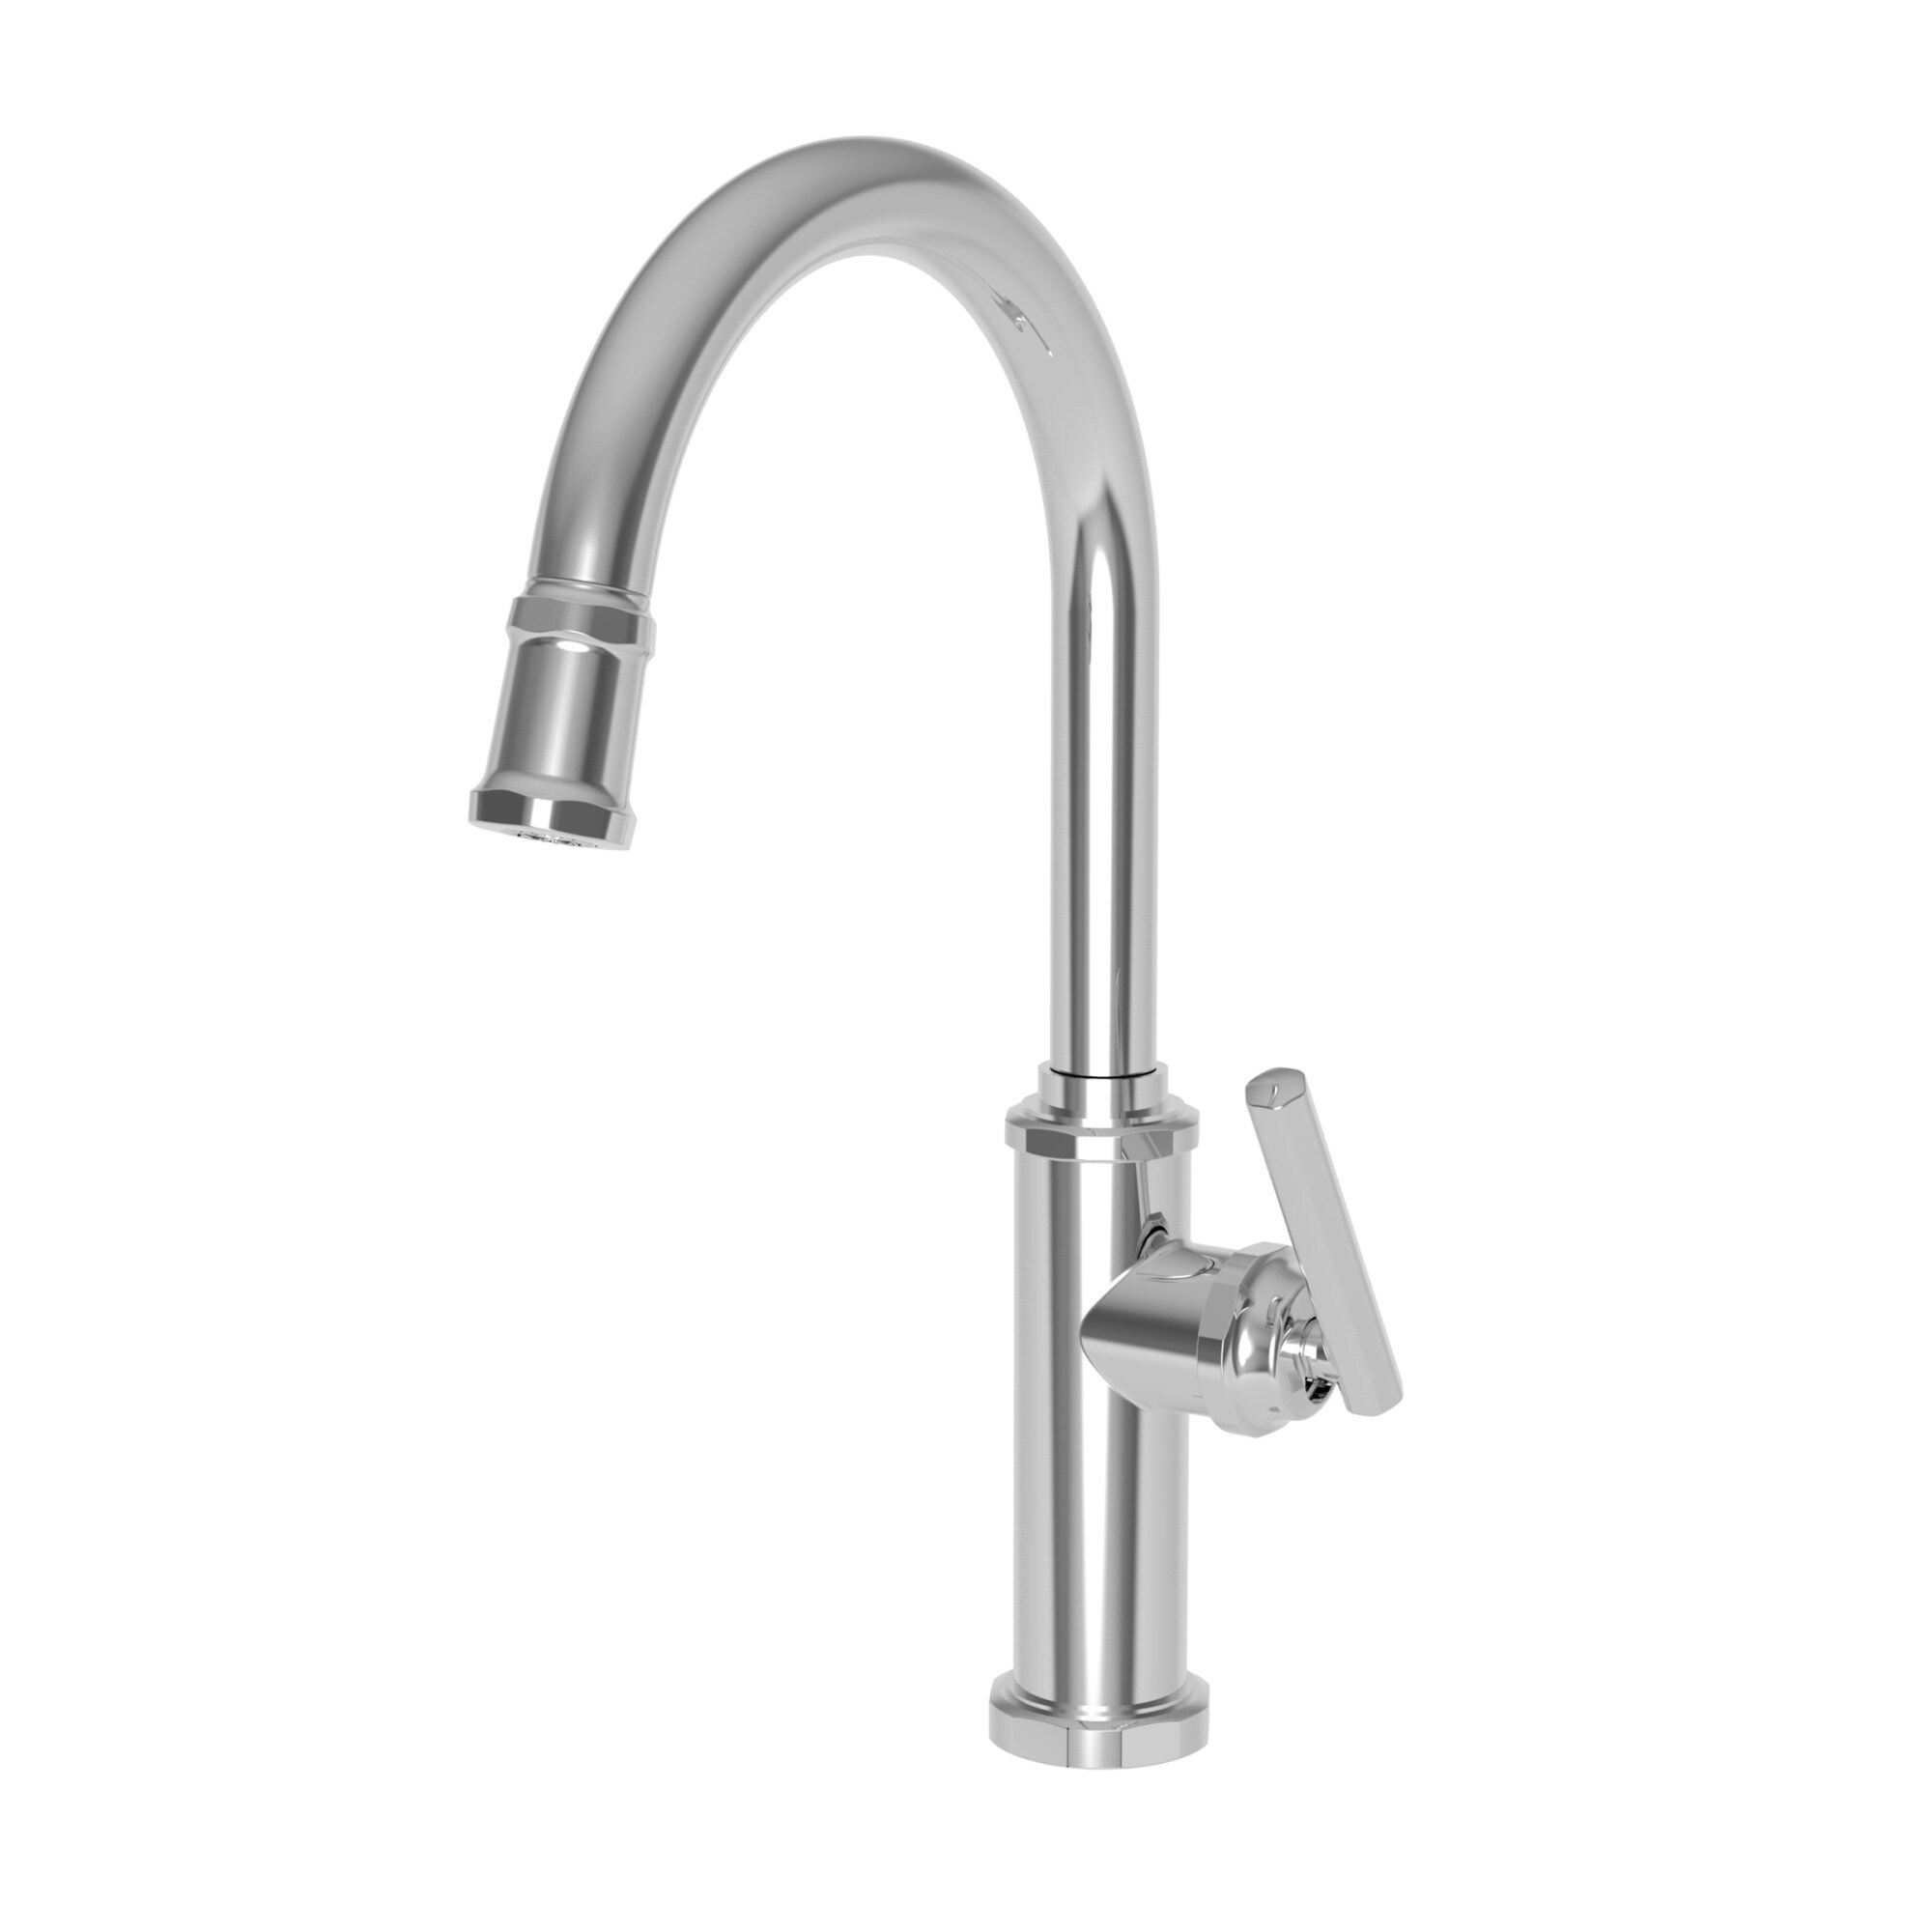 Shop Newport Brass 3190 5113 18 Gpm Single Hole Kitchen Faucet Polished Chrome Overstock 30720639